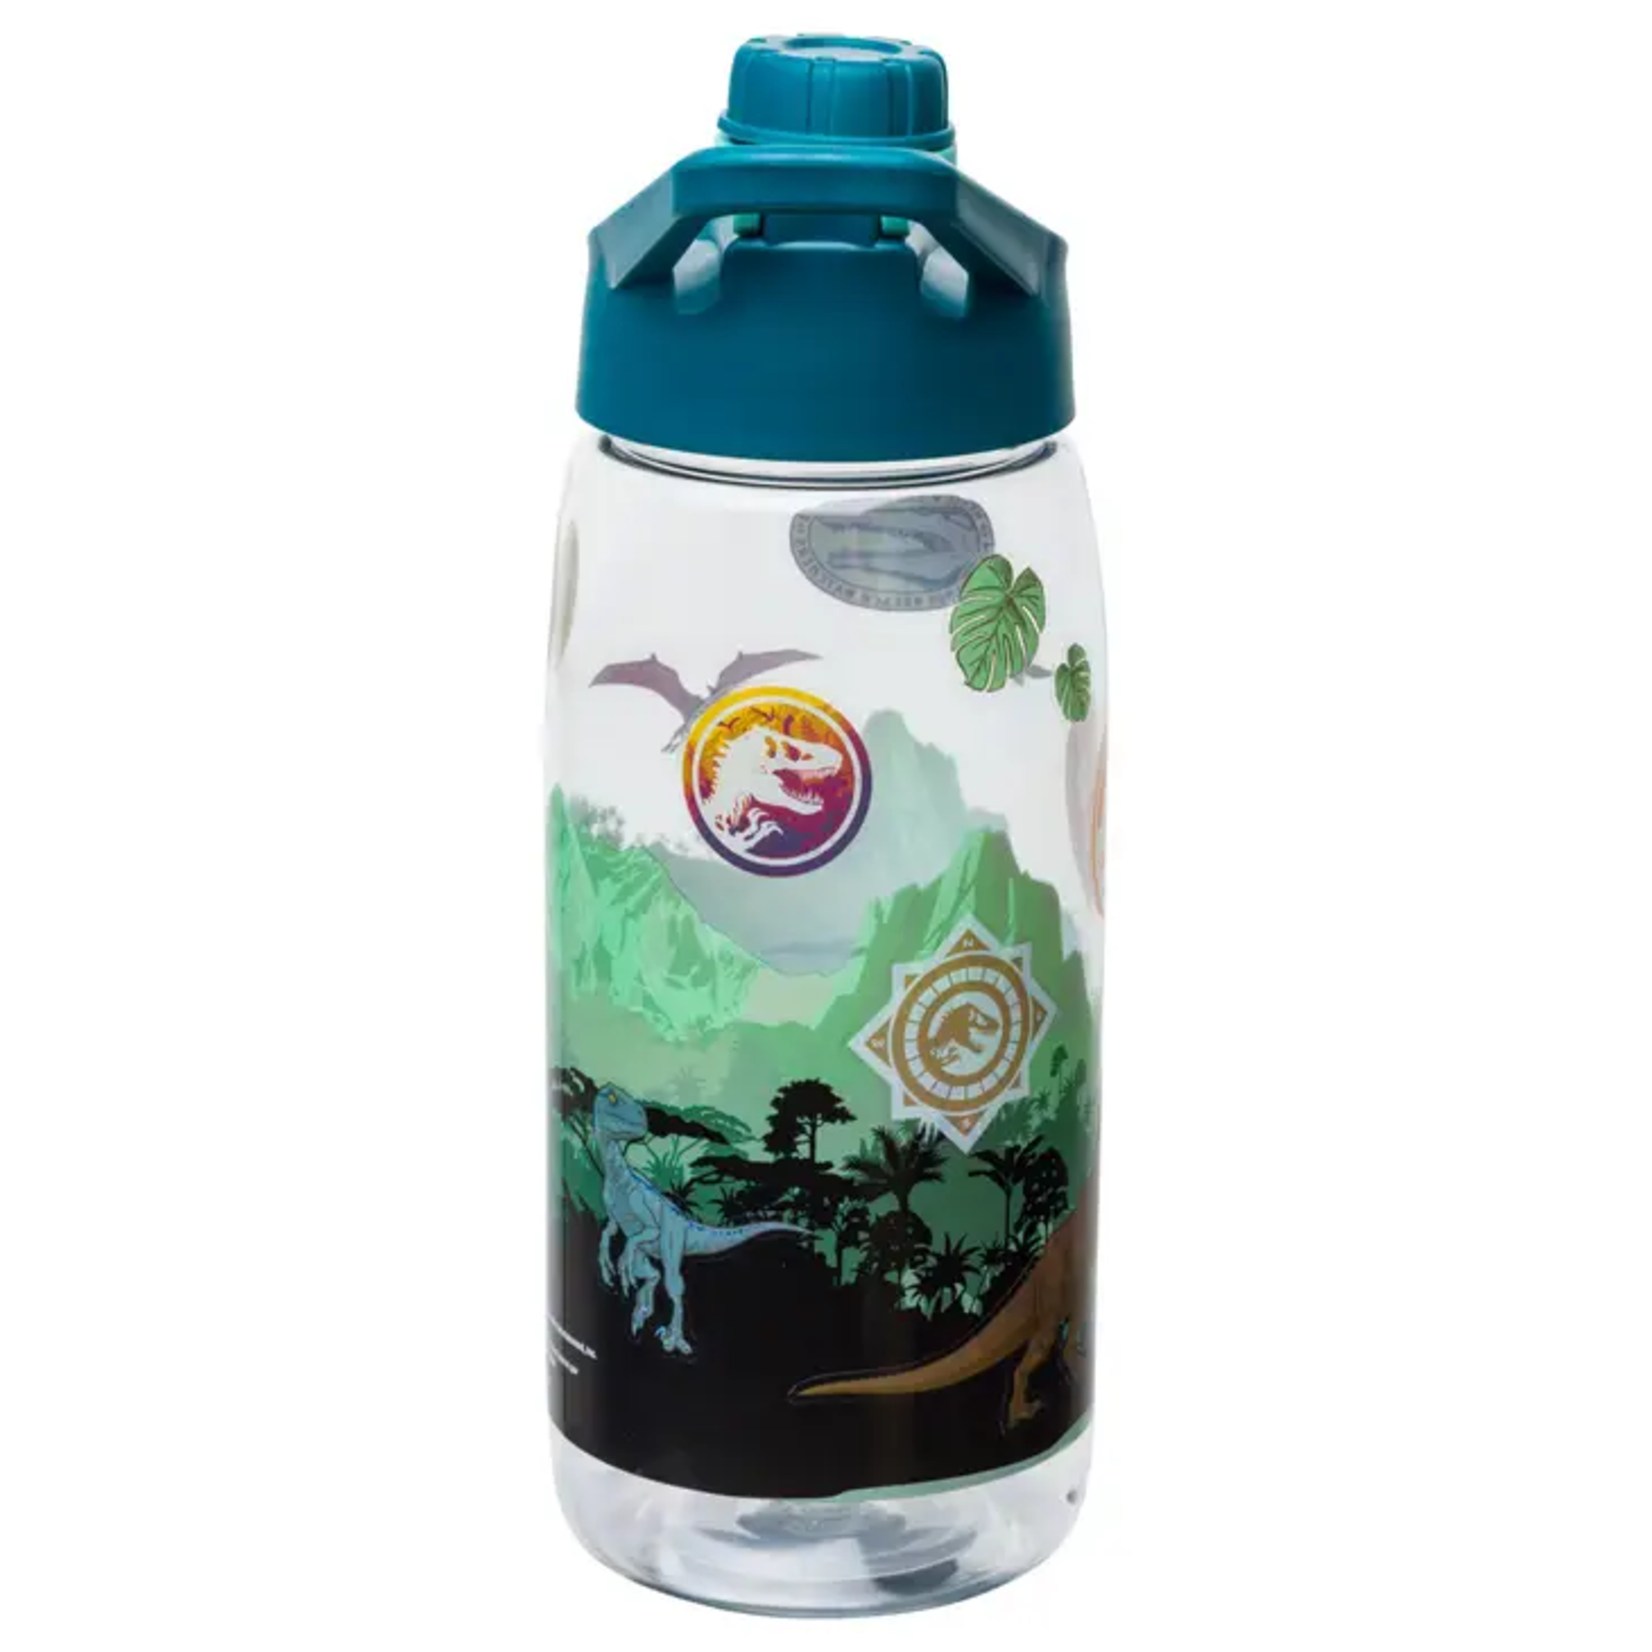 Silver Buffalo Jurassic Park 20oz Water Bottle with Stickers